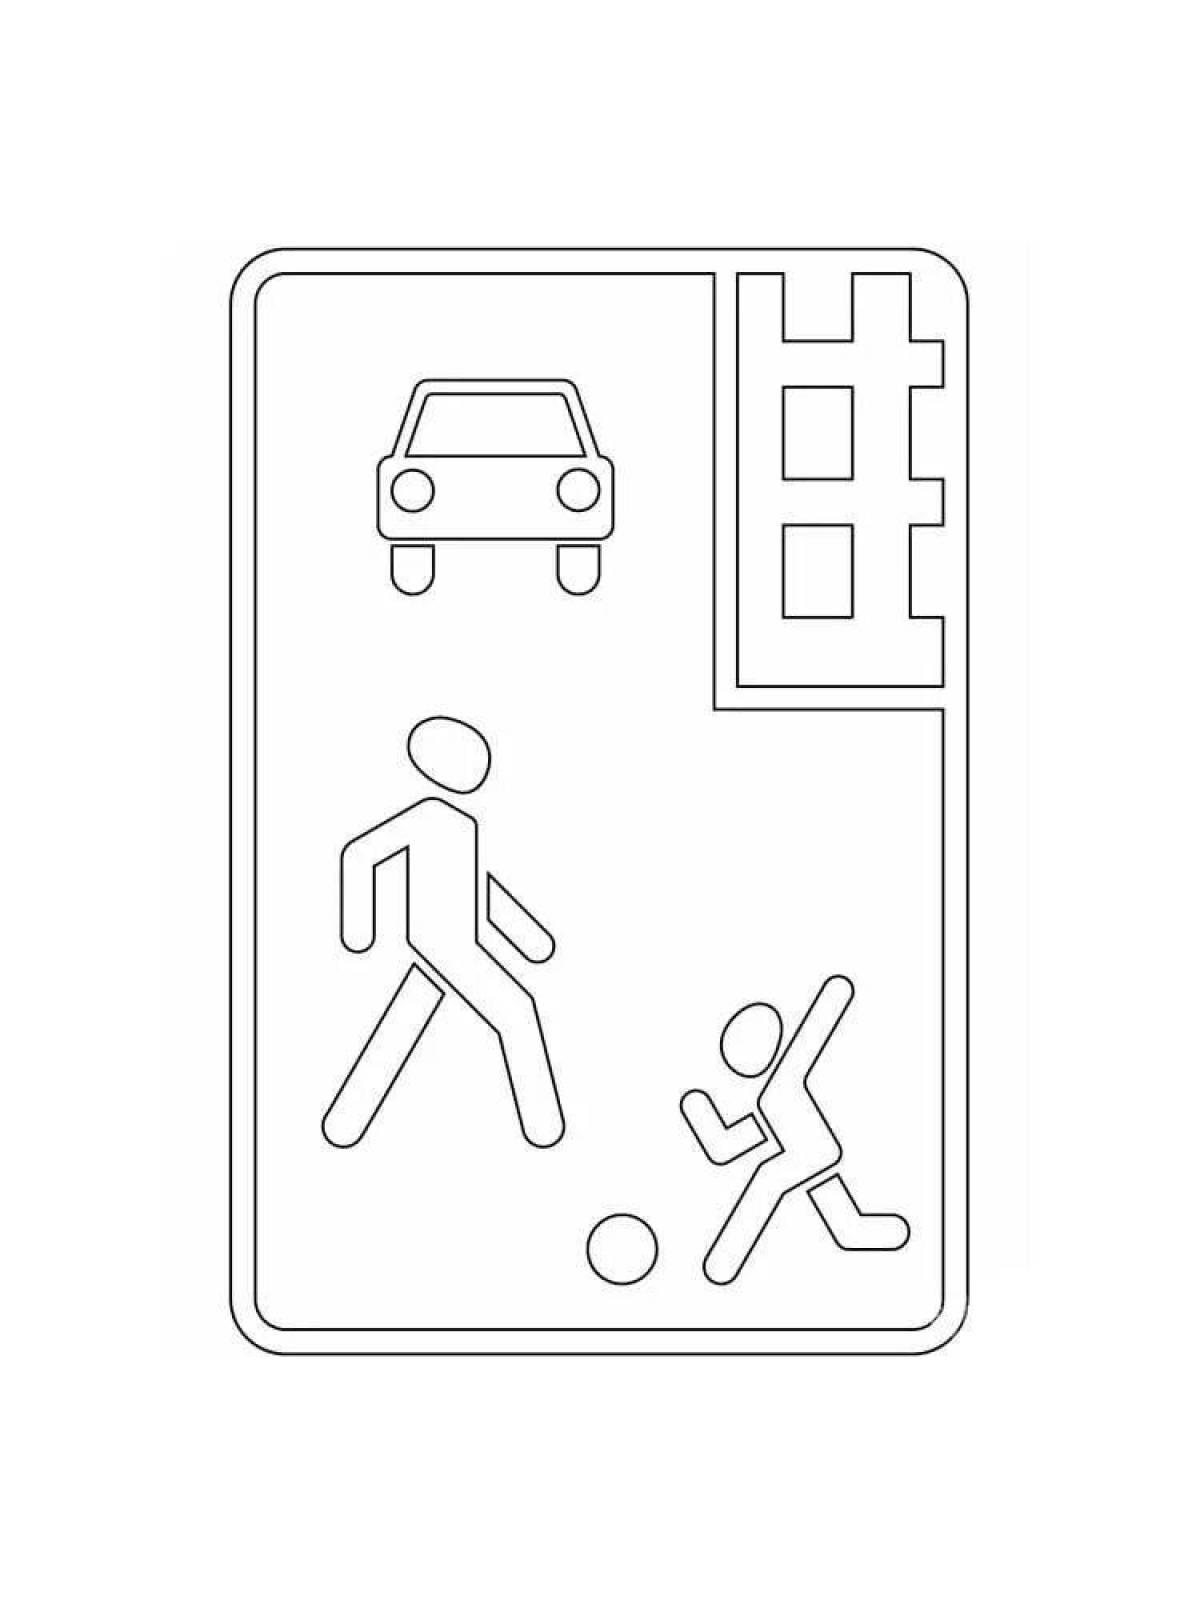 Children's bold road sign template